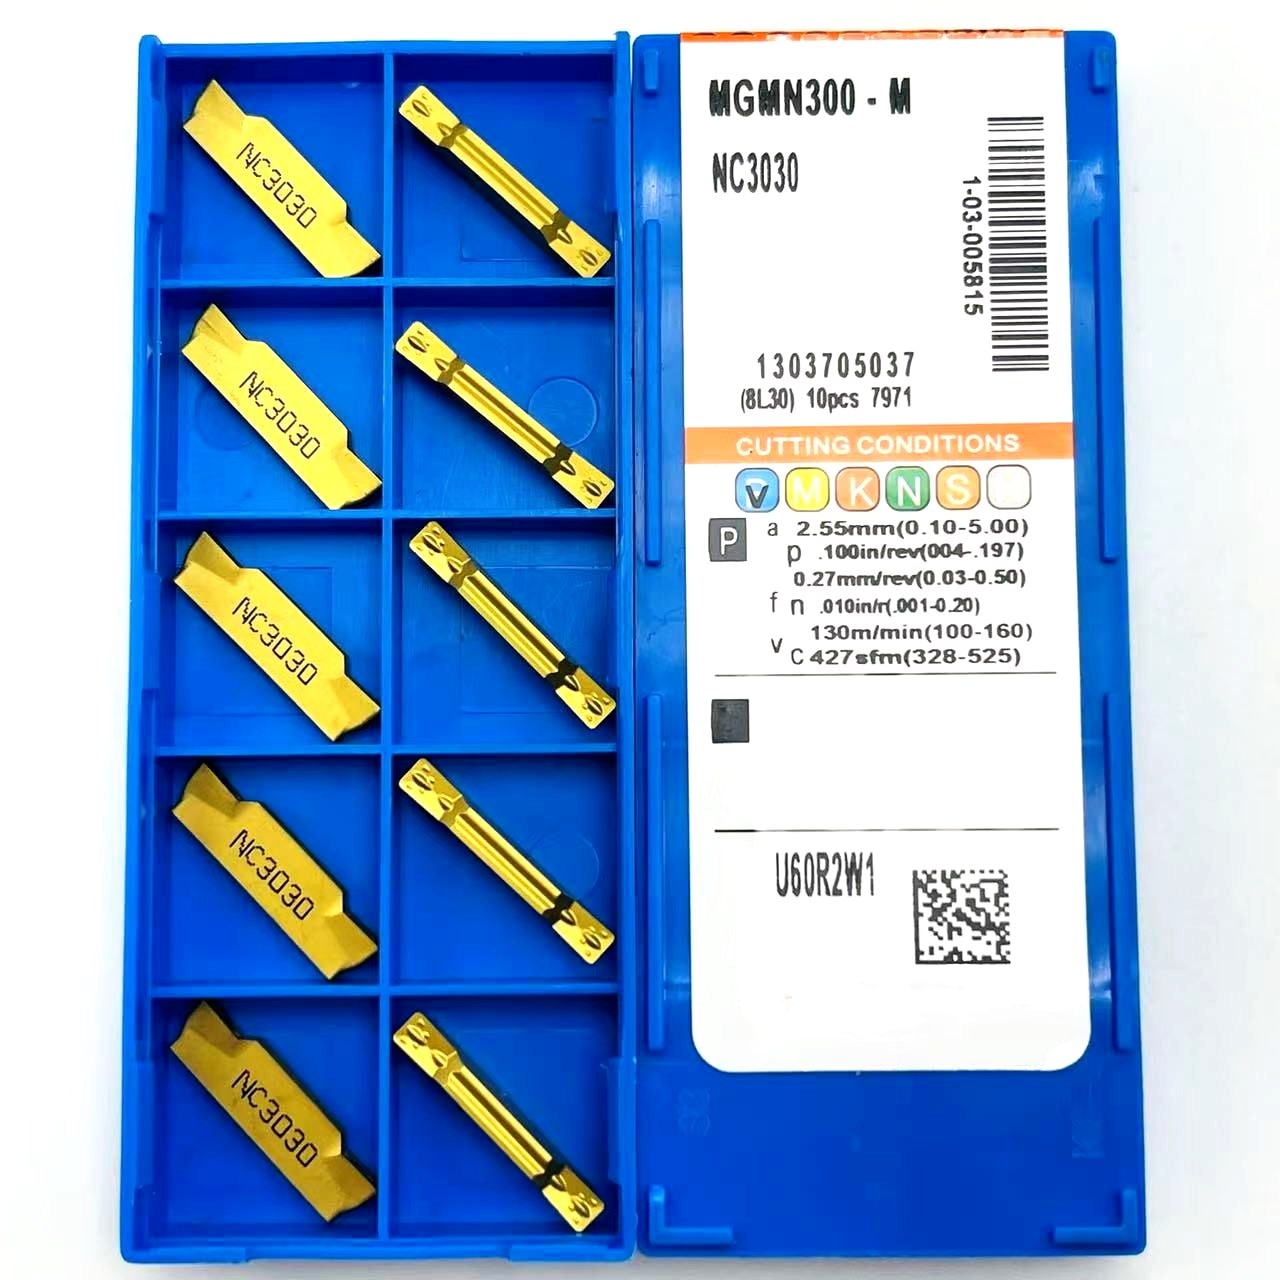 MGMN200 MGMN300 MGMN400 MGMN500 NC3020  3030  PC9030 Slotted Cutting Carbide Blade Lathe Tool Tungsten Carbide Cutting Tools